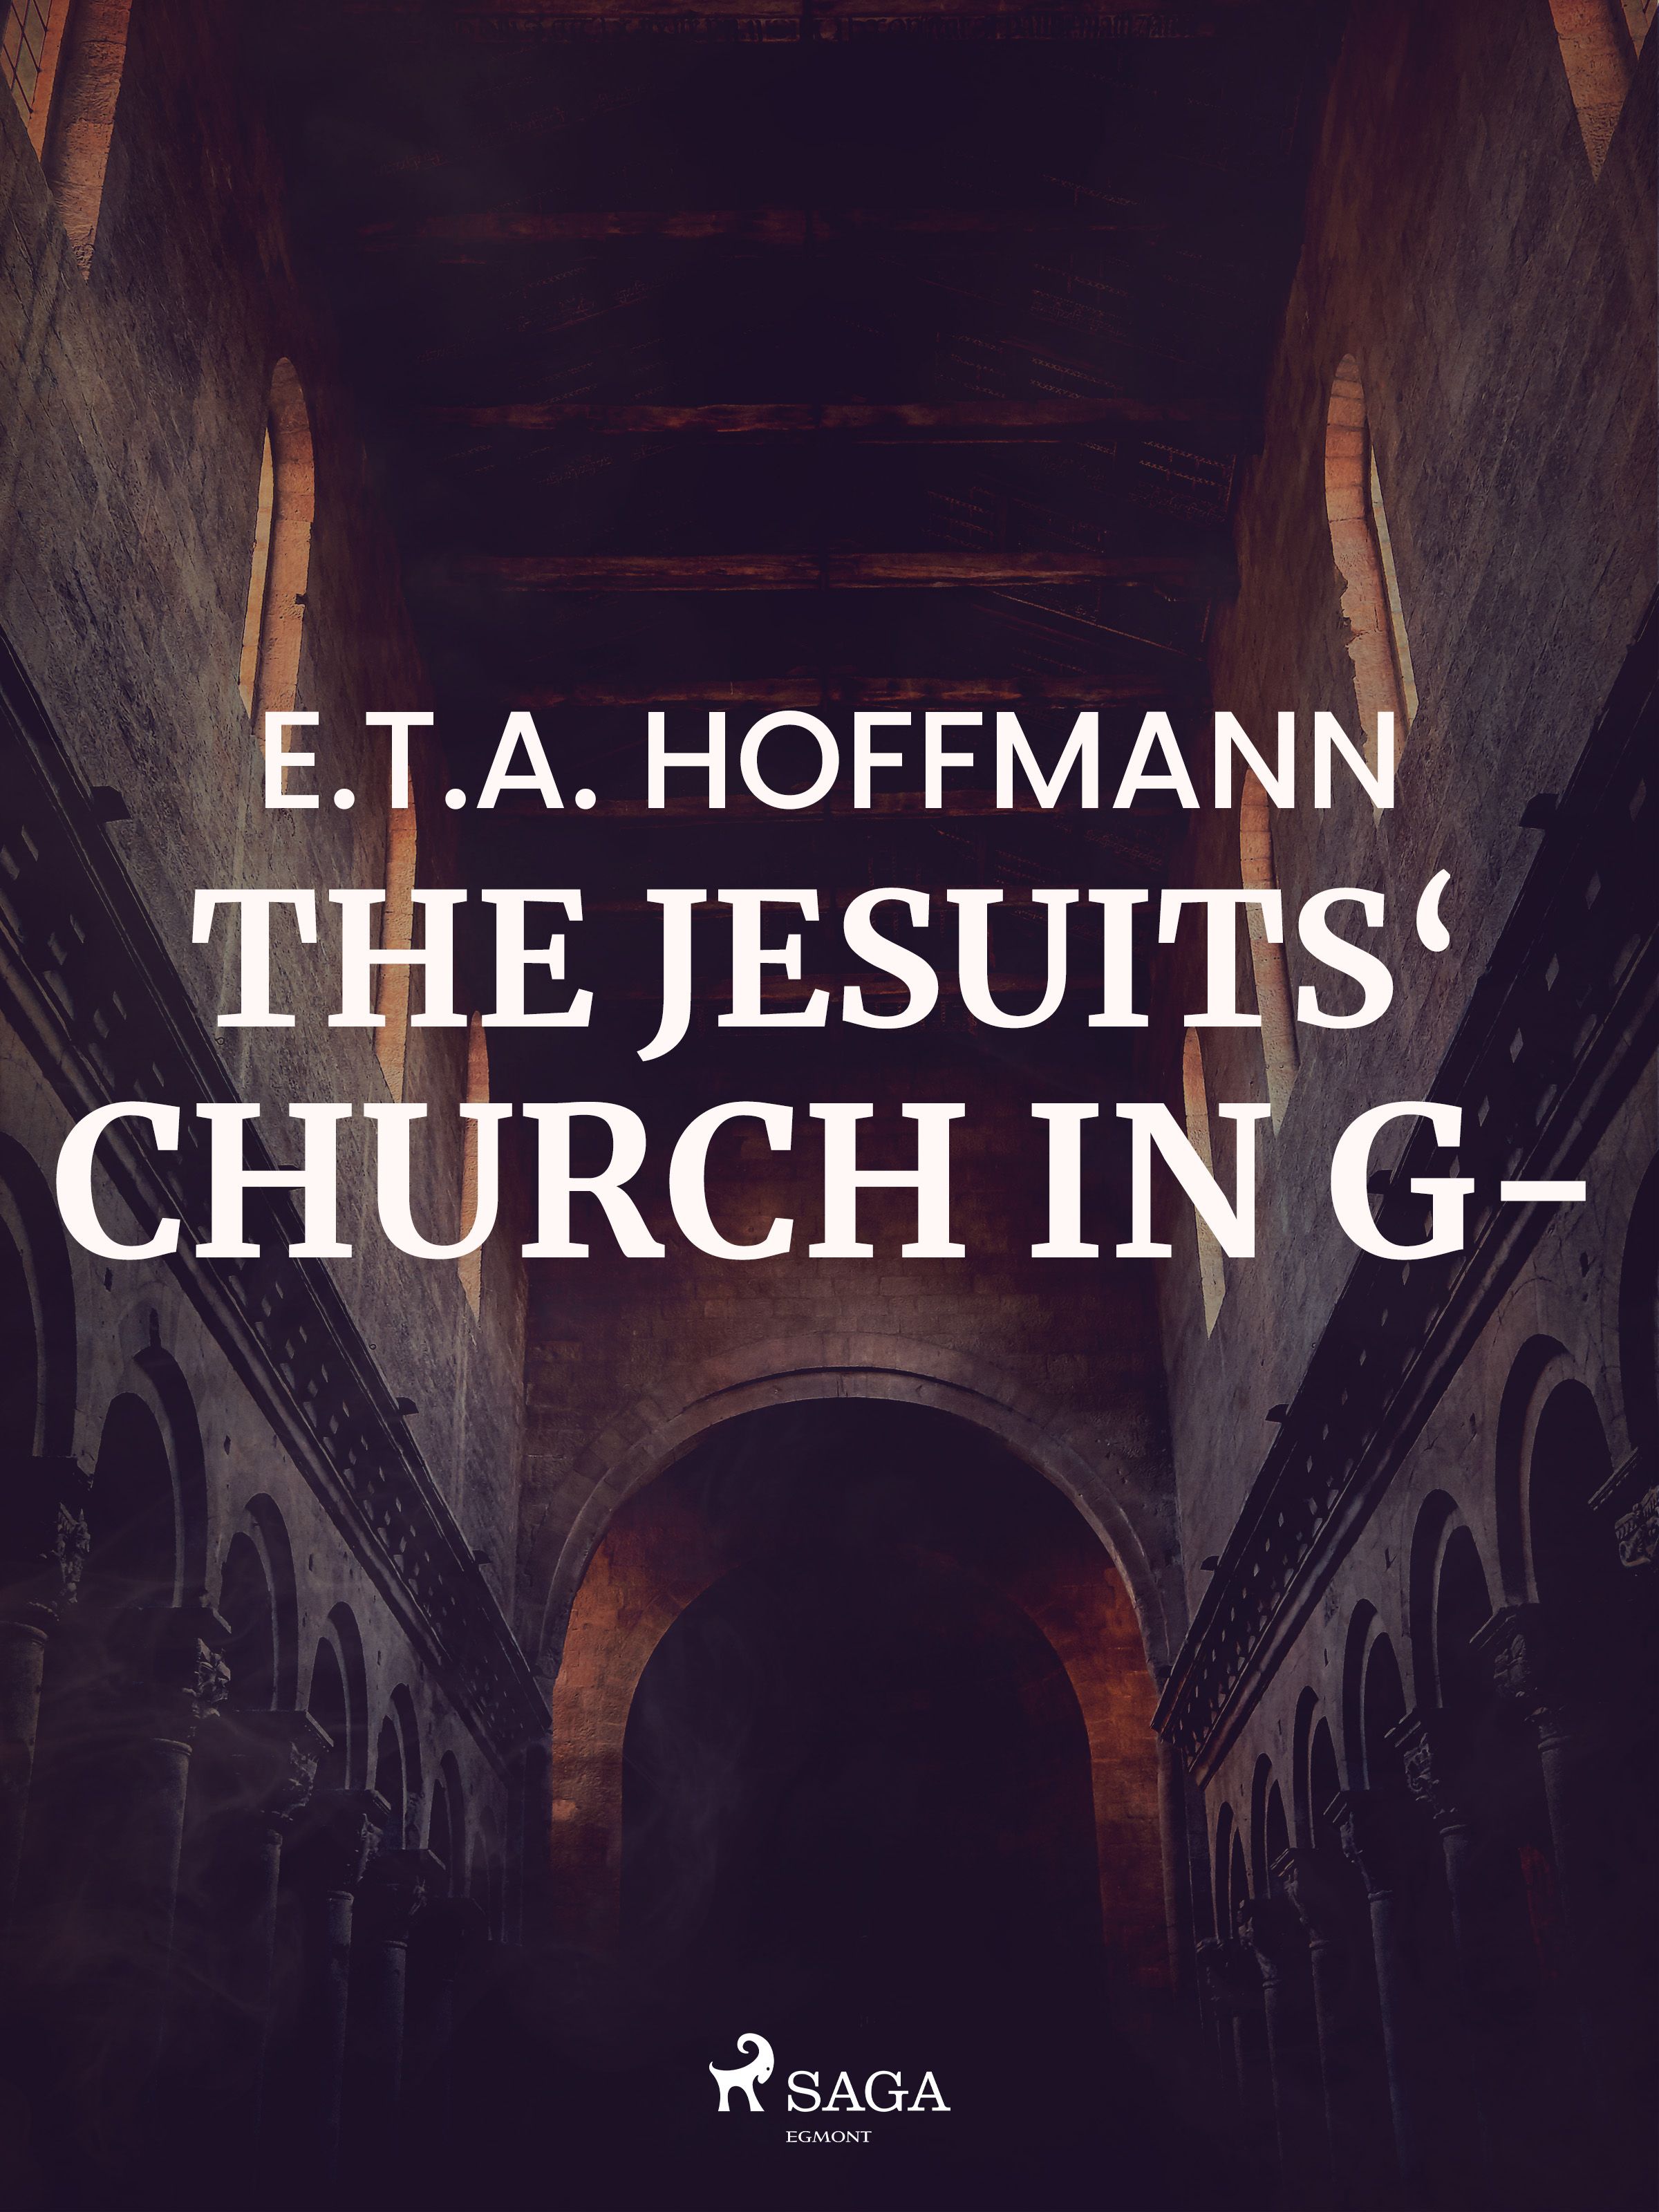 The Jesuits‘ Church in G-, eBook by E.T.A. Hoffmann